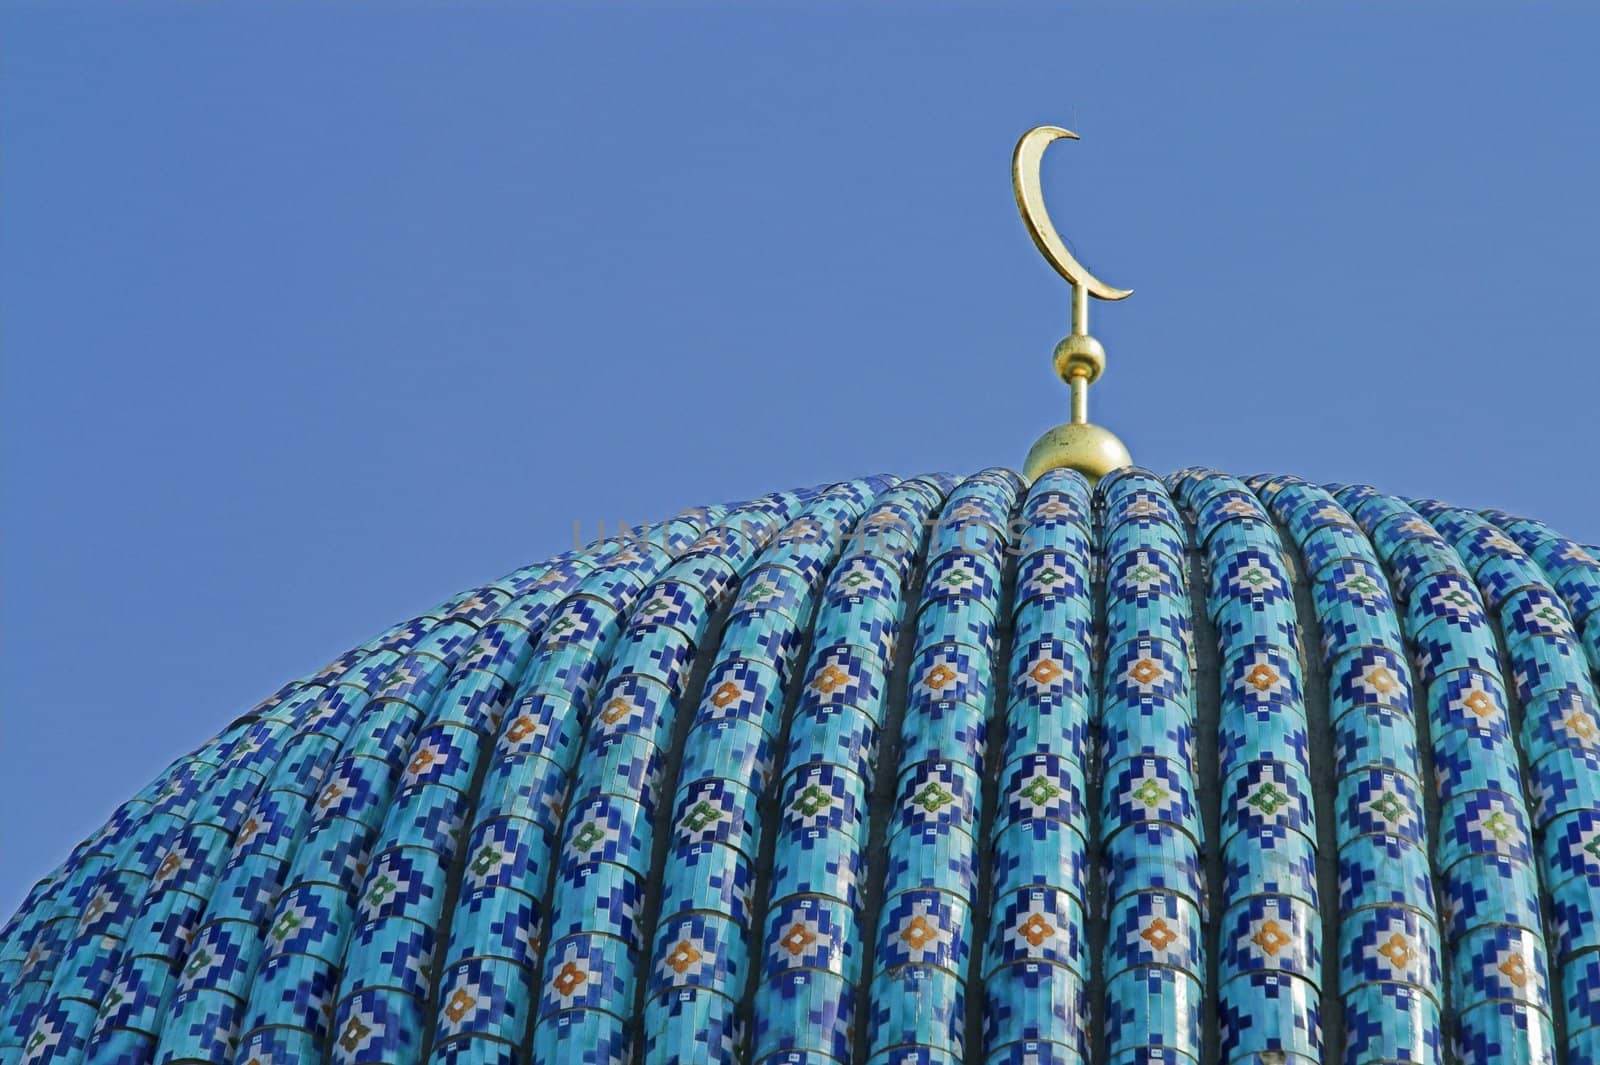 tiled dome of mosque in Saint Petersburg by simfan